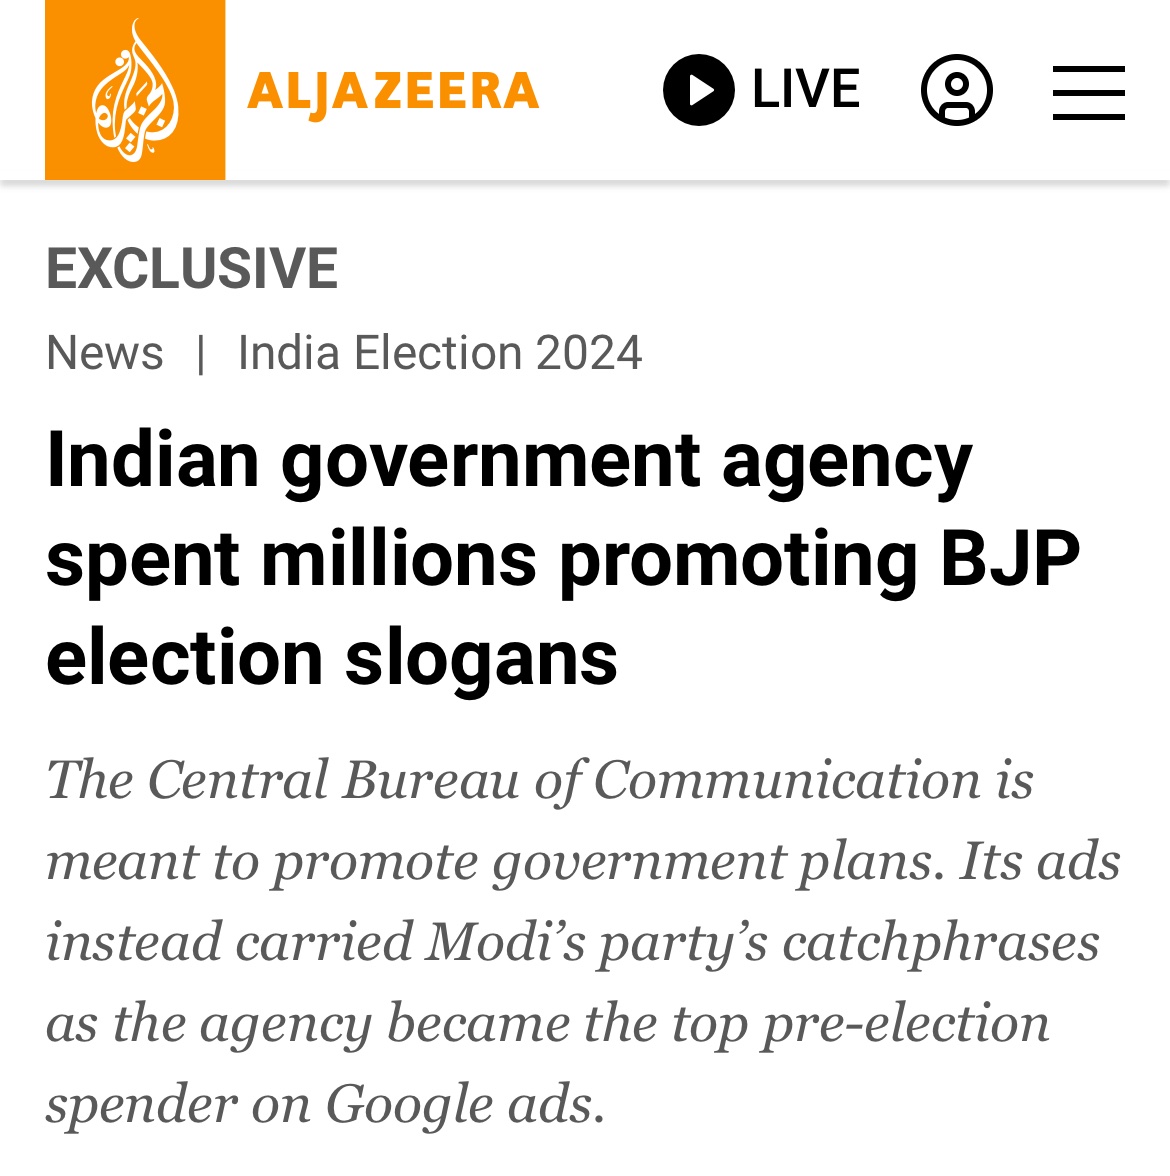 An obnoxious misuse of People’s money for promoting Modi campaign. The ECI, of course will not consider this as any violation of Constitutional morality and will permit the gross distortion of a level playing field. Those guilty of this must be made accountable.